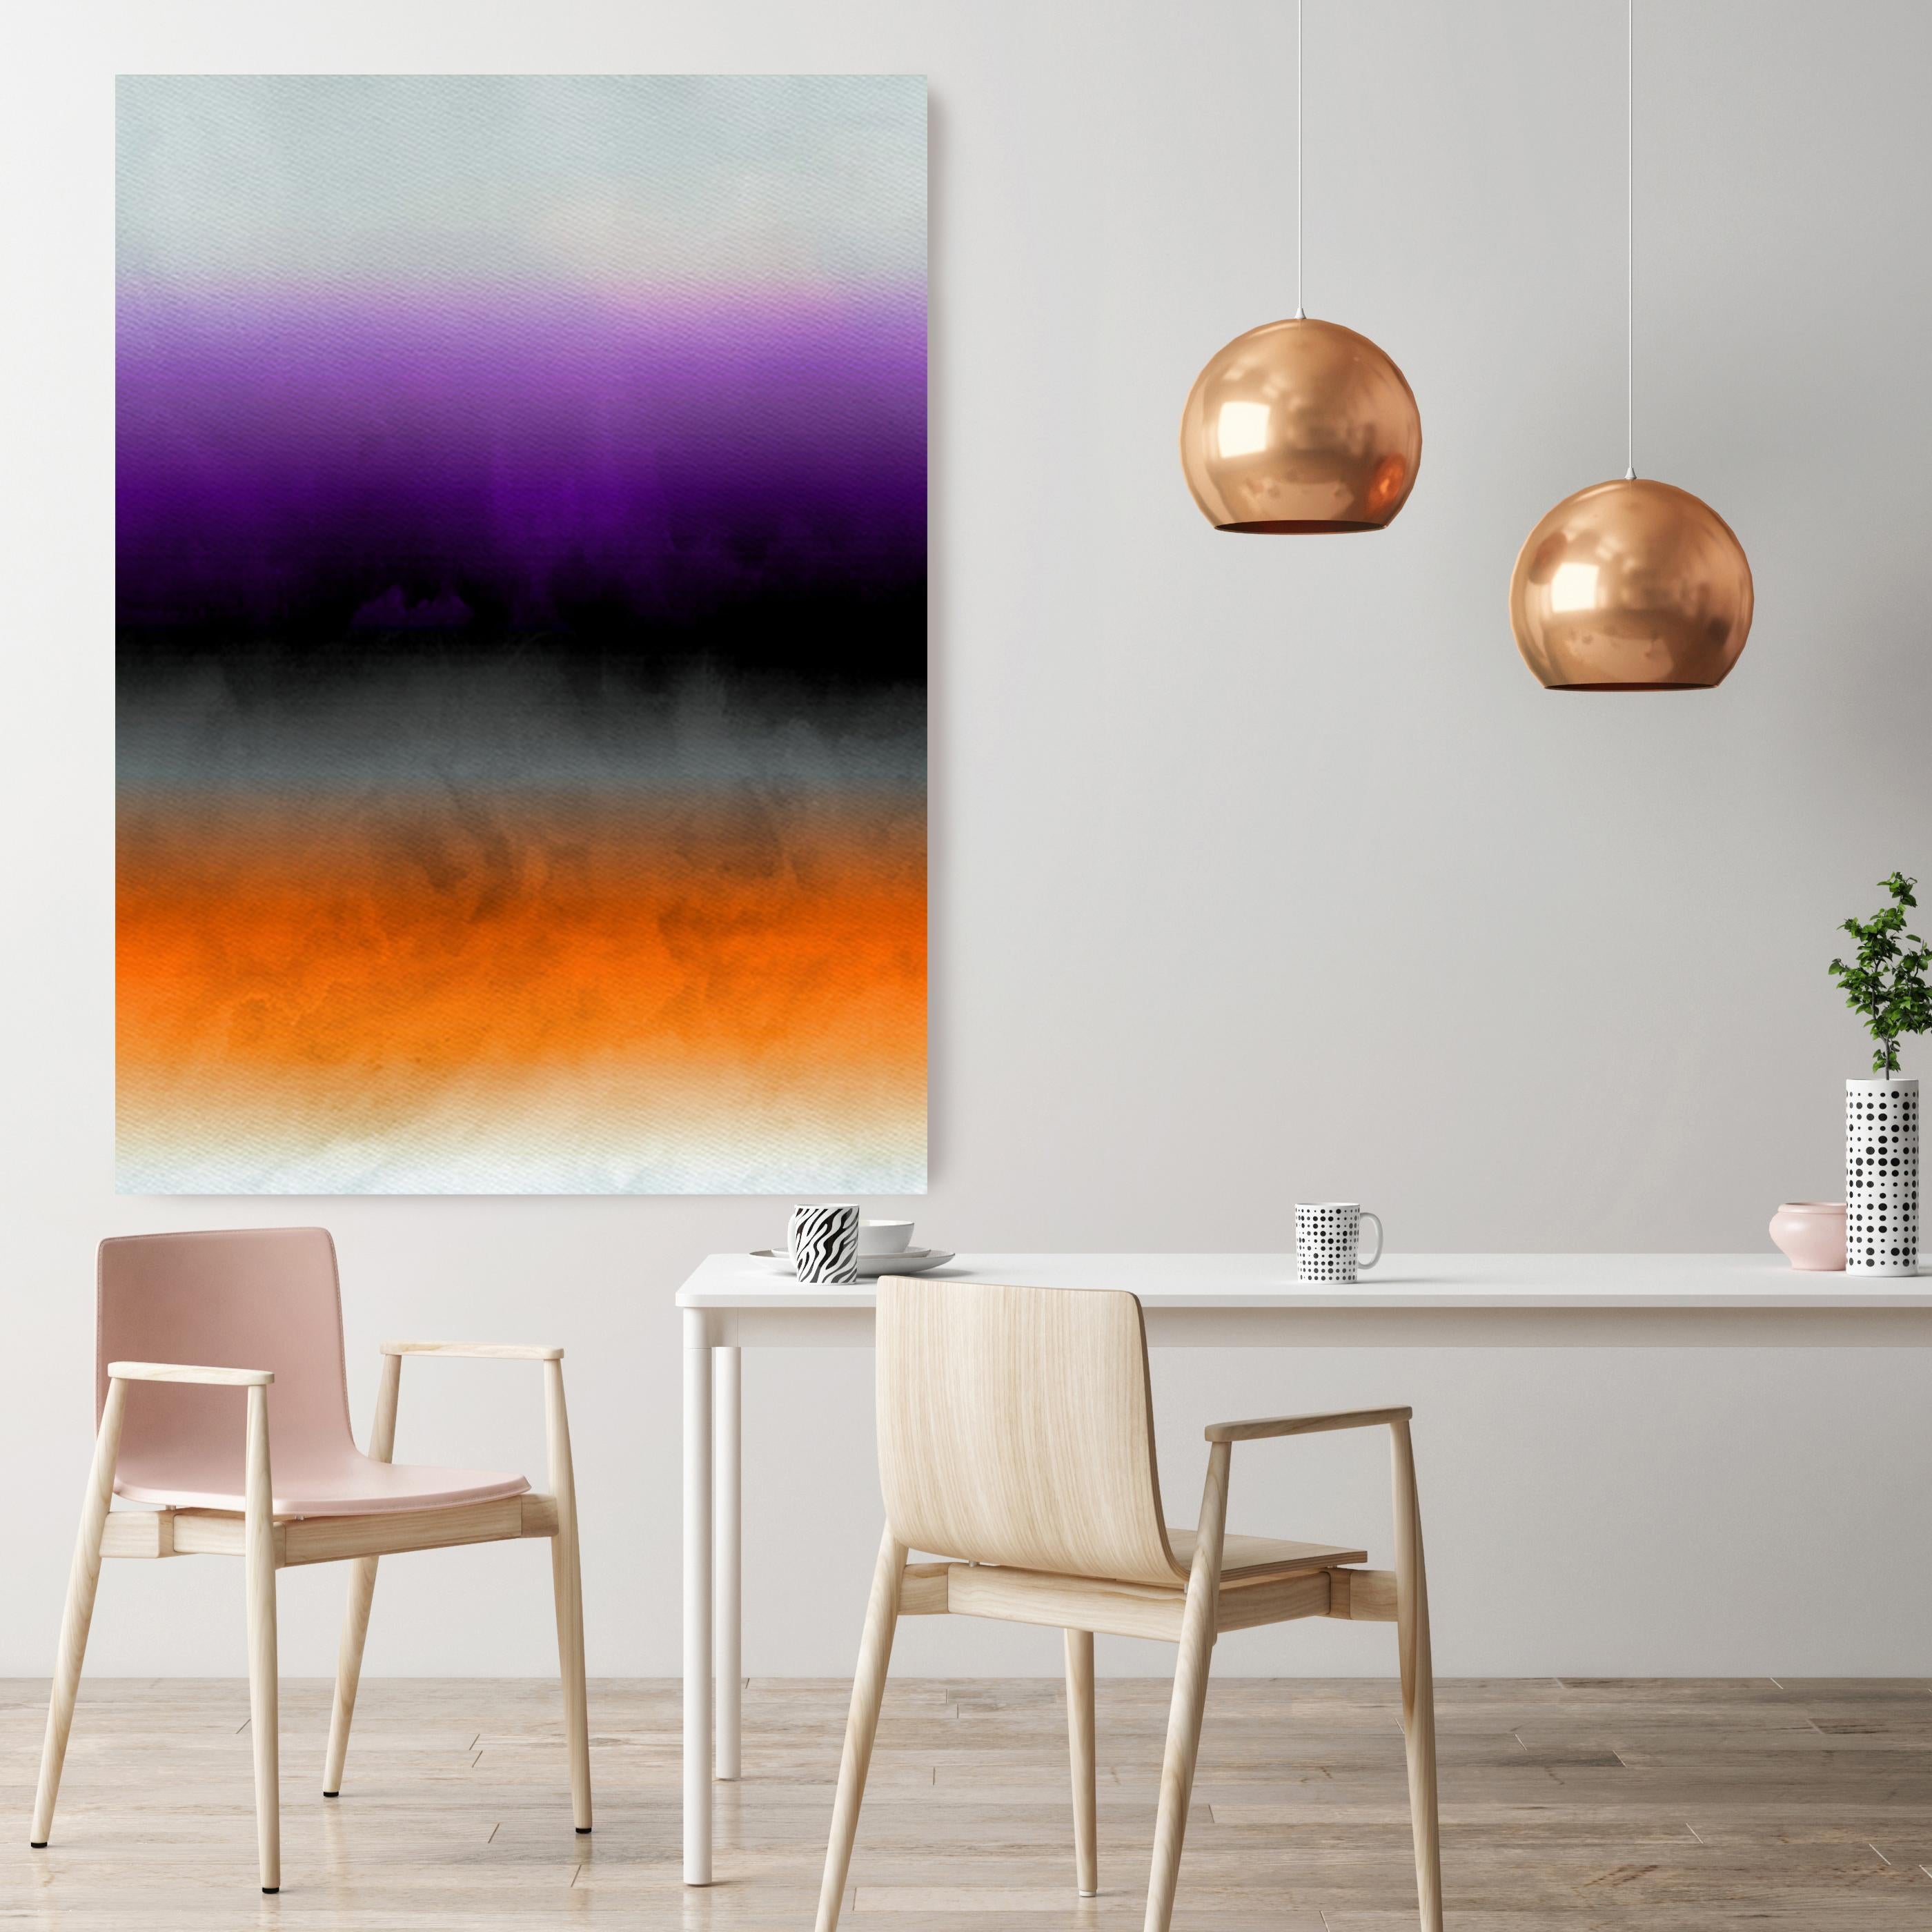 Irena Orlov Still-Life Painting - Orange Purple Ombre Painting Hand Textured Giclee on Canvas 40W x 60H" 